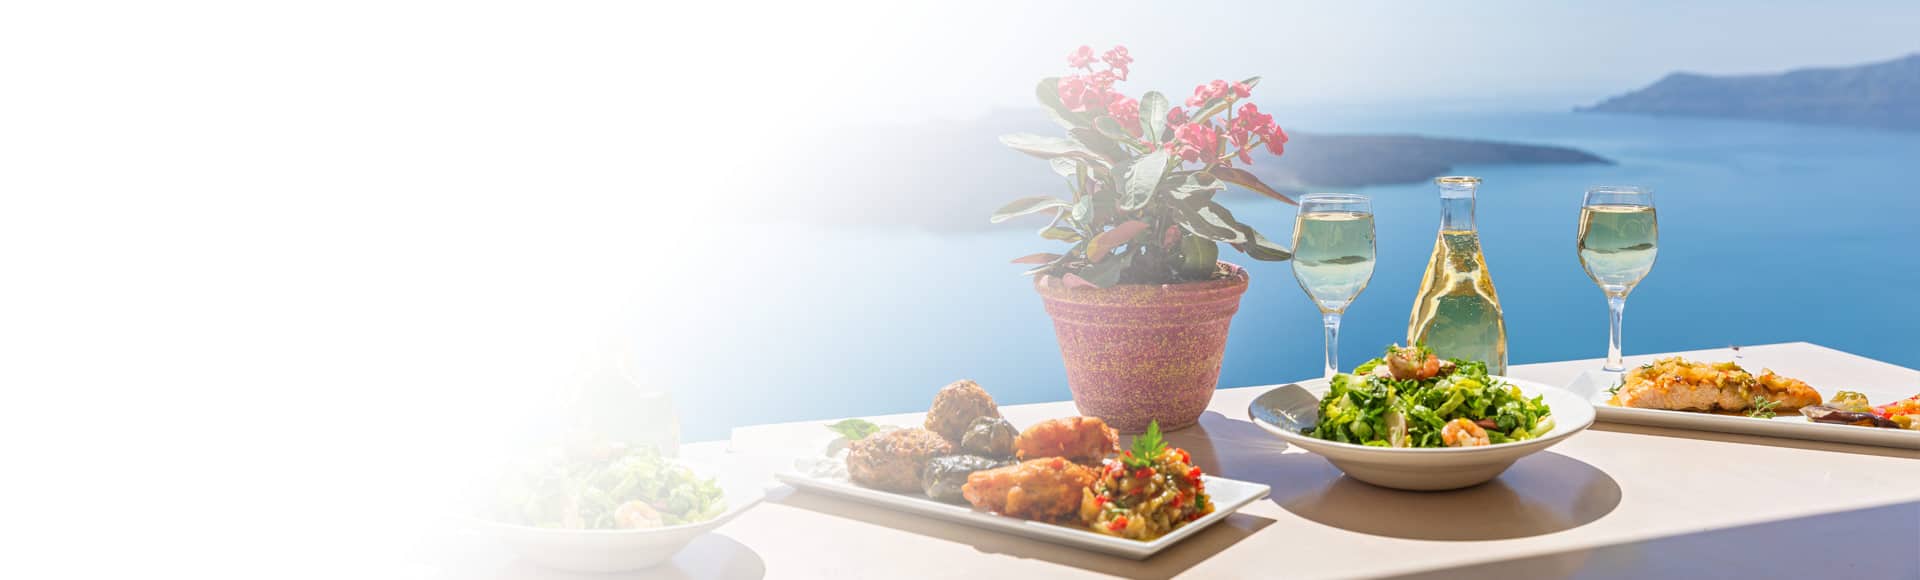 Eat, drink, and dine in Santorini when you travel on Oceania Cruises to tour the Greek Islands of the Aegean Sea for vacation.